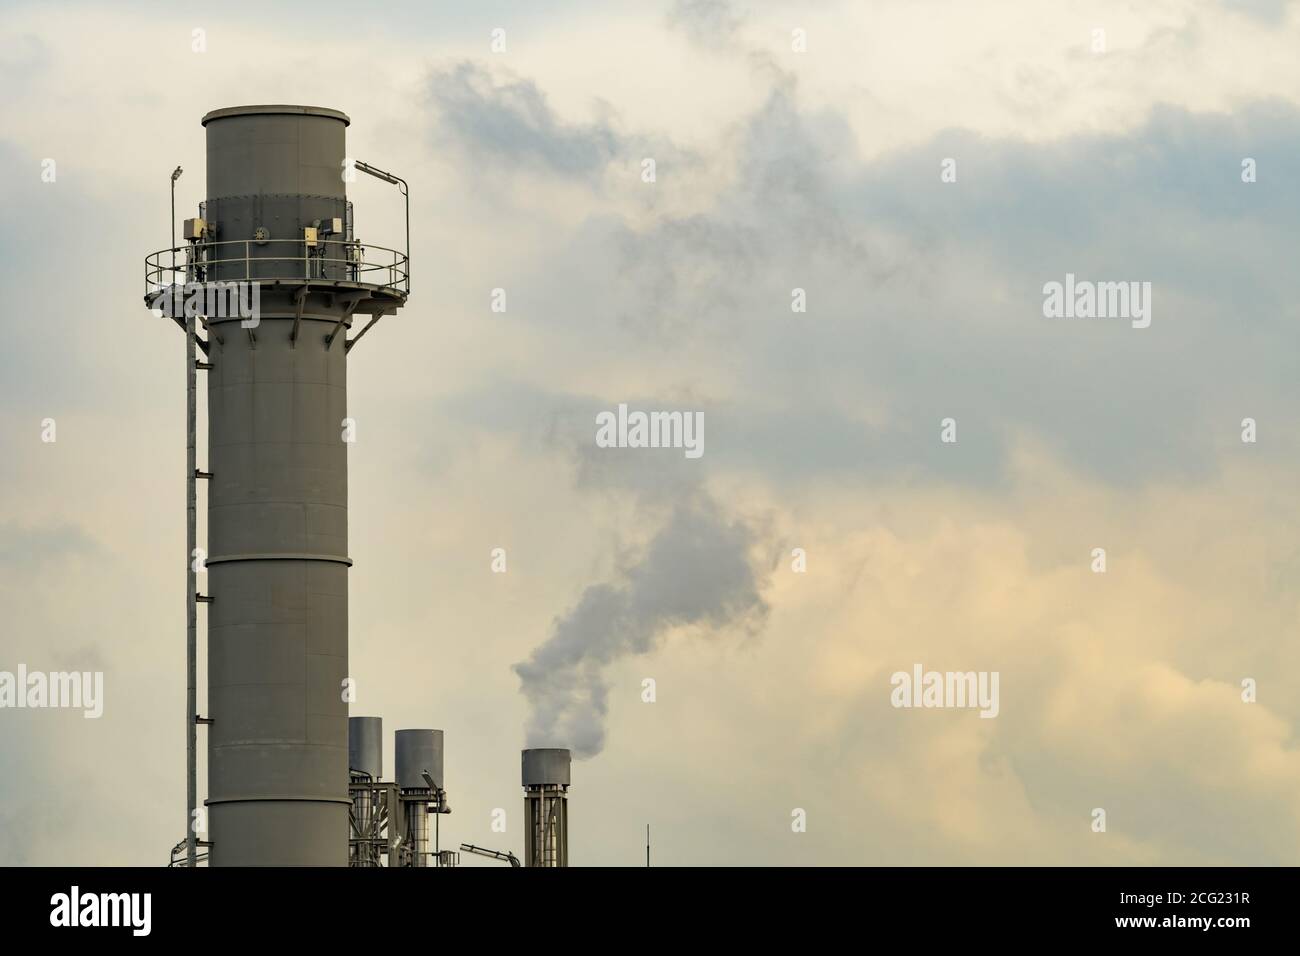 Air pollution from factory. Black smoke from chimney of industrial pipe. Global warming problem concept. Air pollutant emission factors. Stock Photo